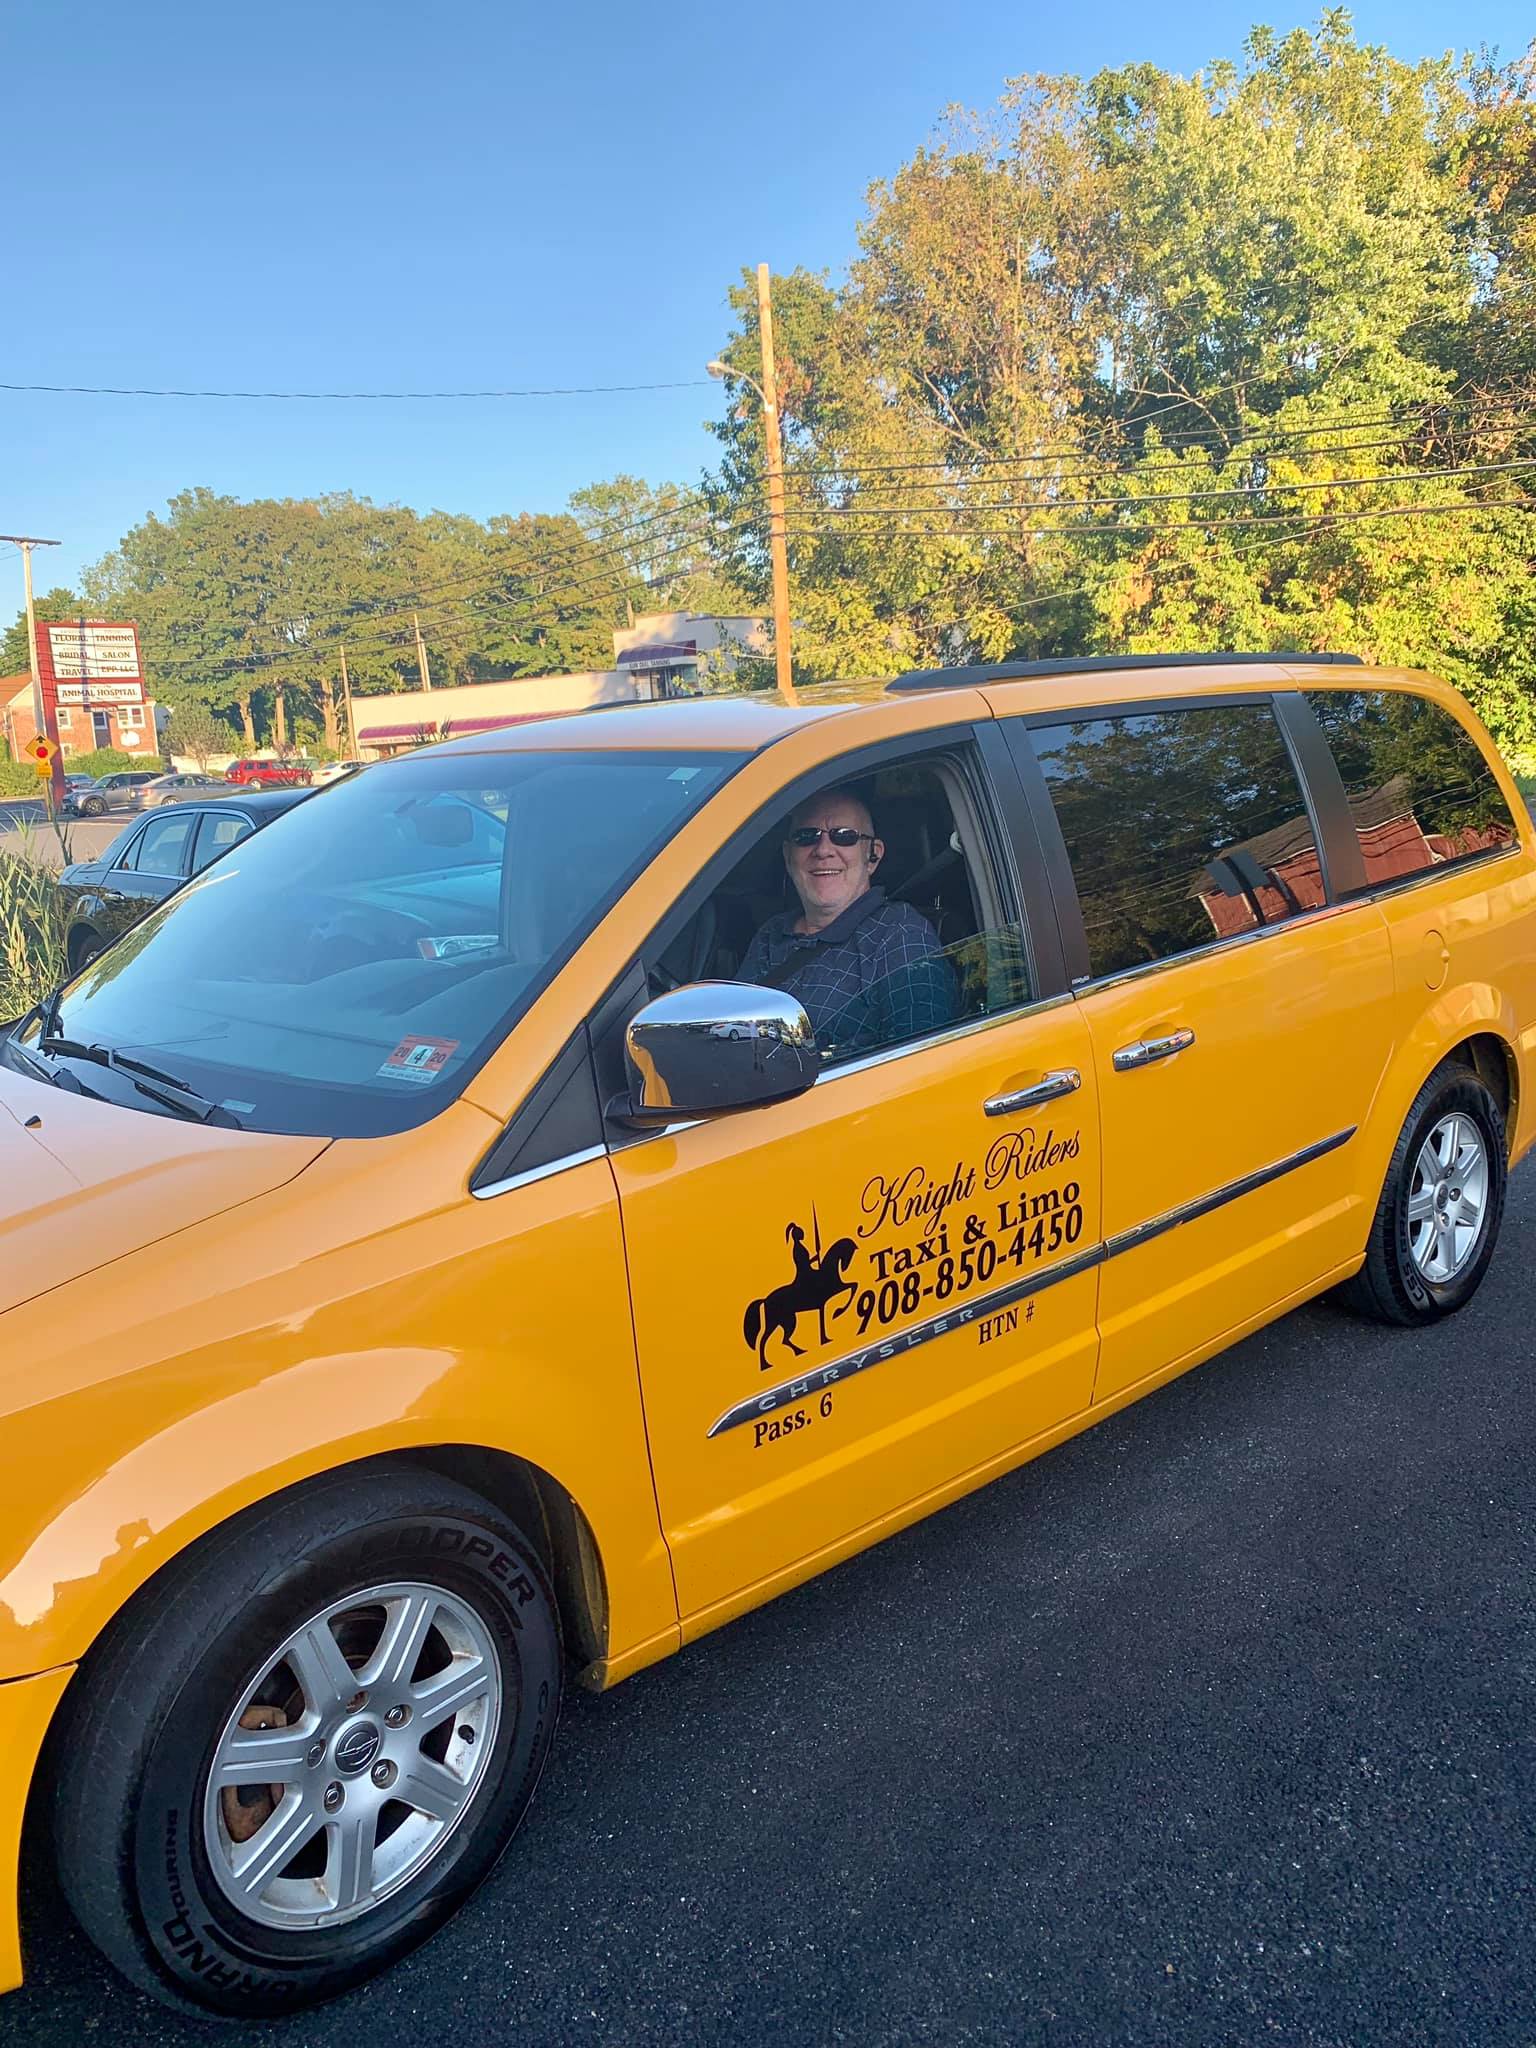 Knight riders taxi and Limo service, not only do we do Limos, black car service, shuttle vans and City tours we also do locals serving Our community for over 20yrs..